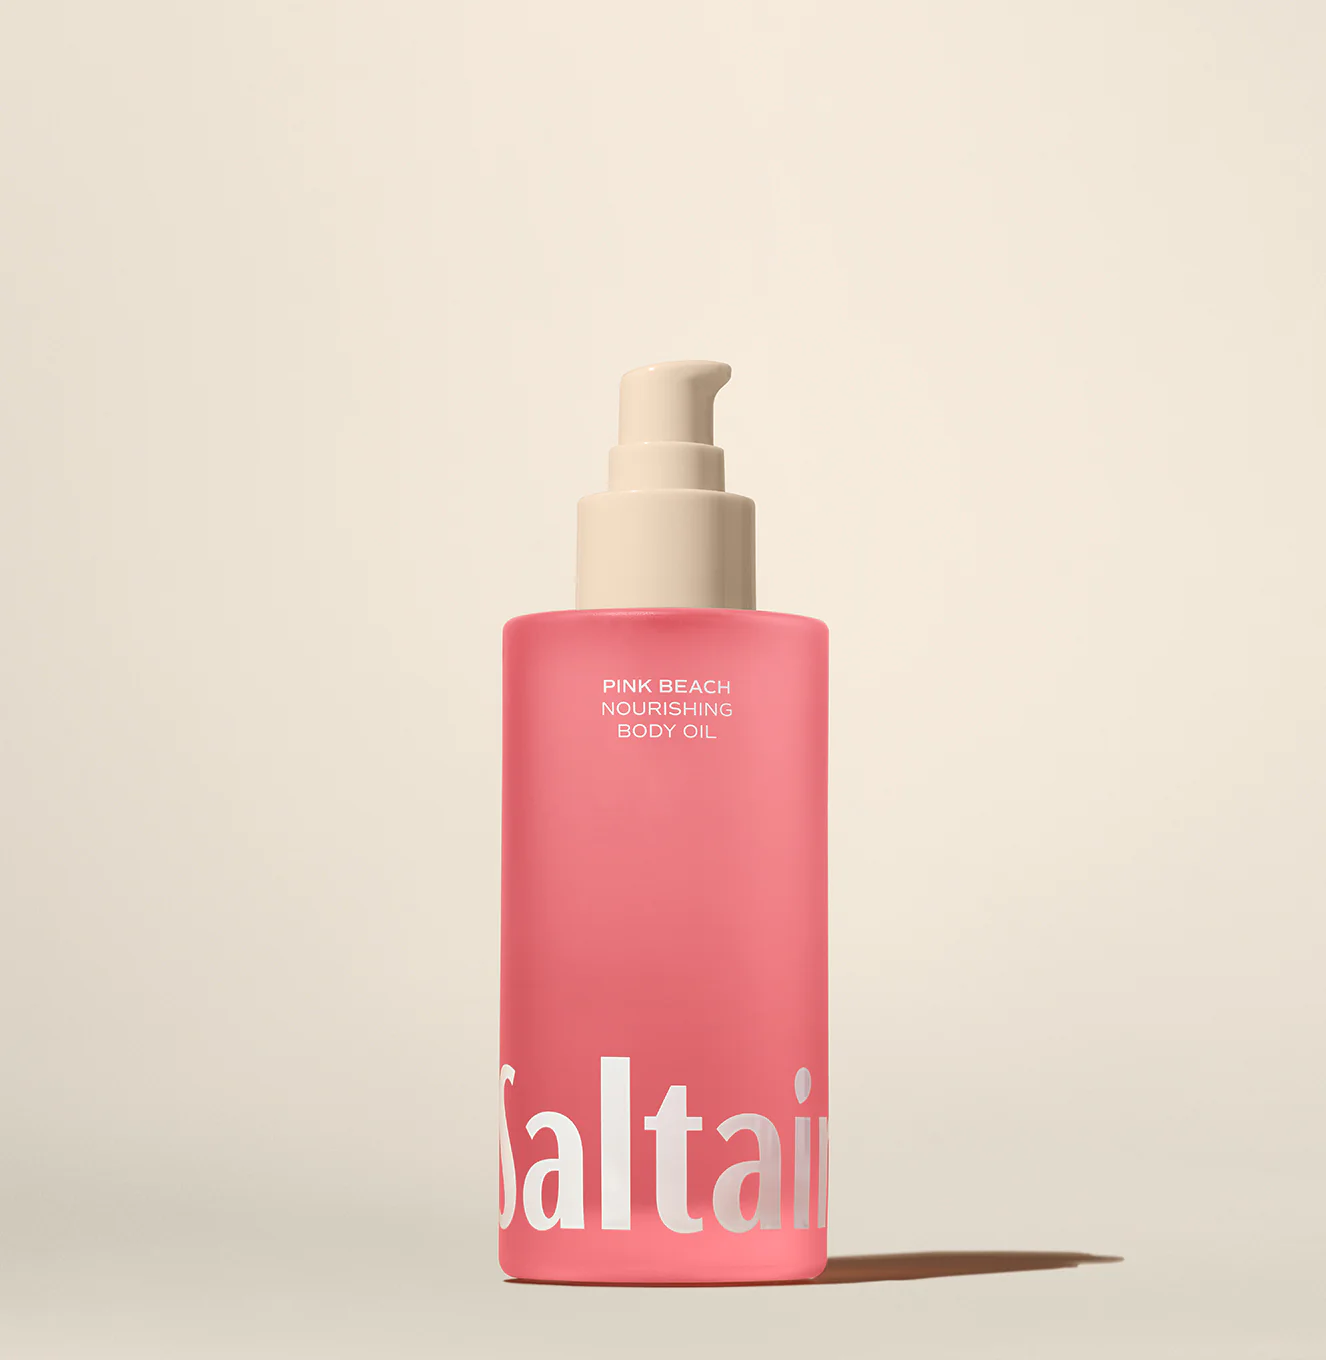 You are currently viewing Saltair Body Oil Review – Is It Legit & Worth Trying?